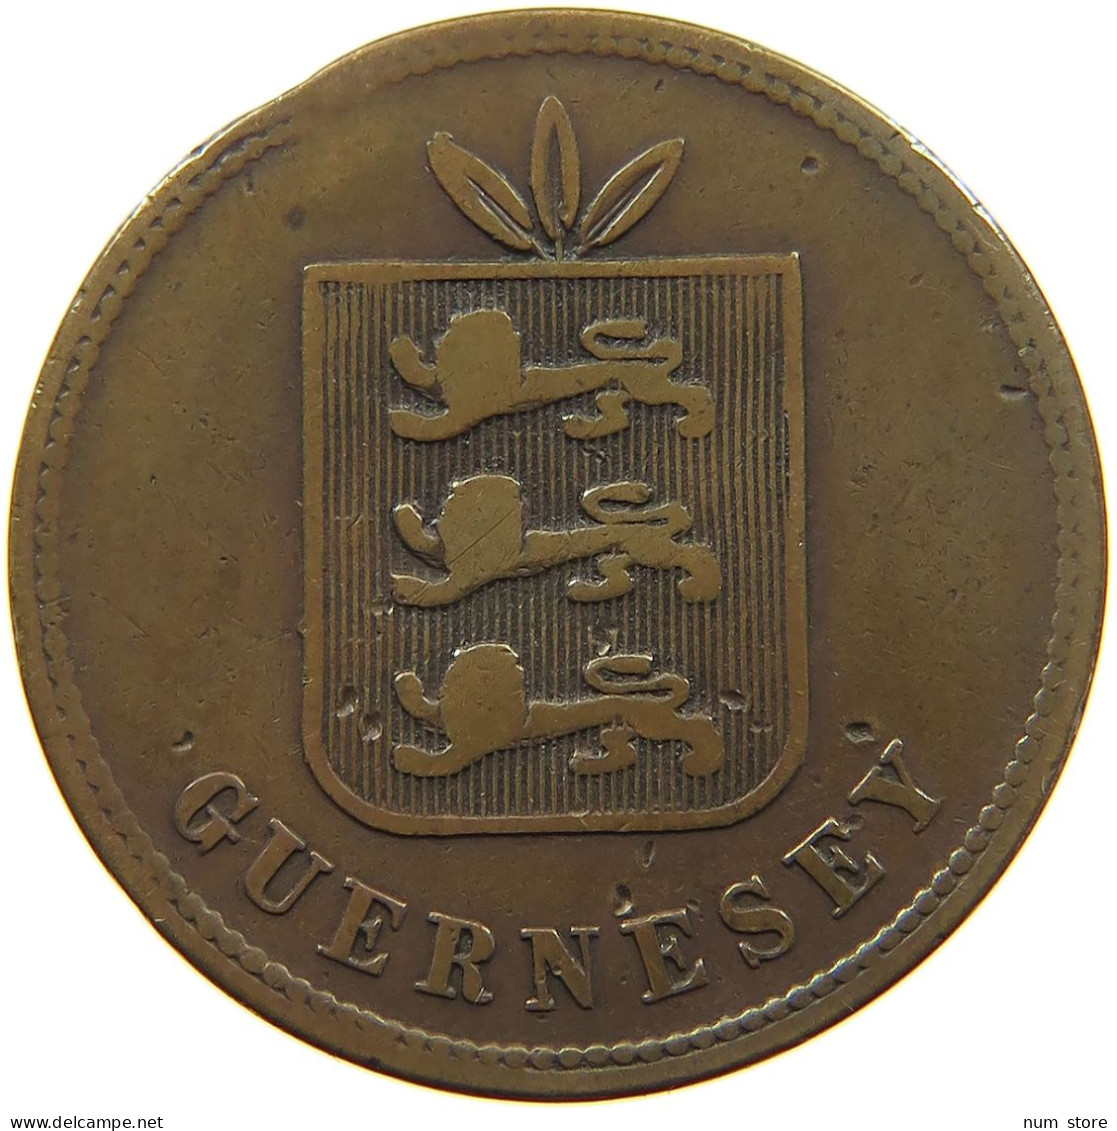 GUERNSEY 4 DOUBLES 1874 Victoria 1837-1901 #a084 0419 - Guernesey